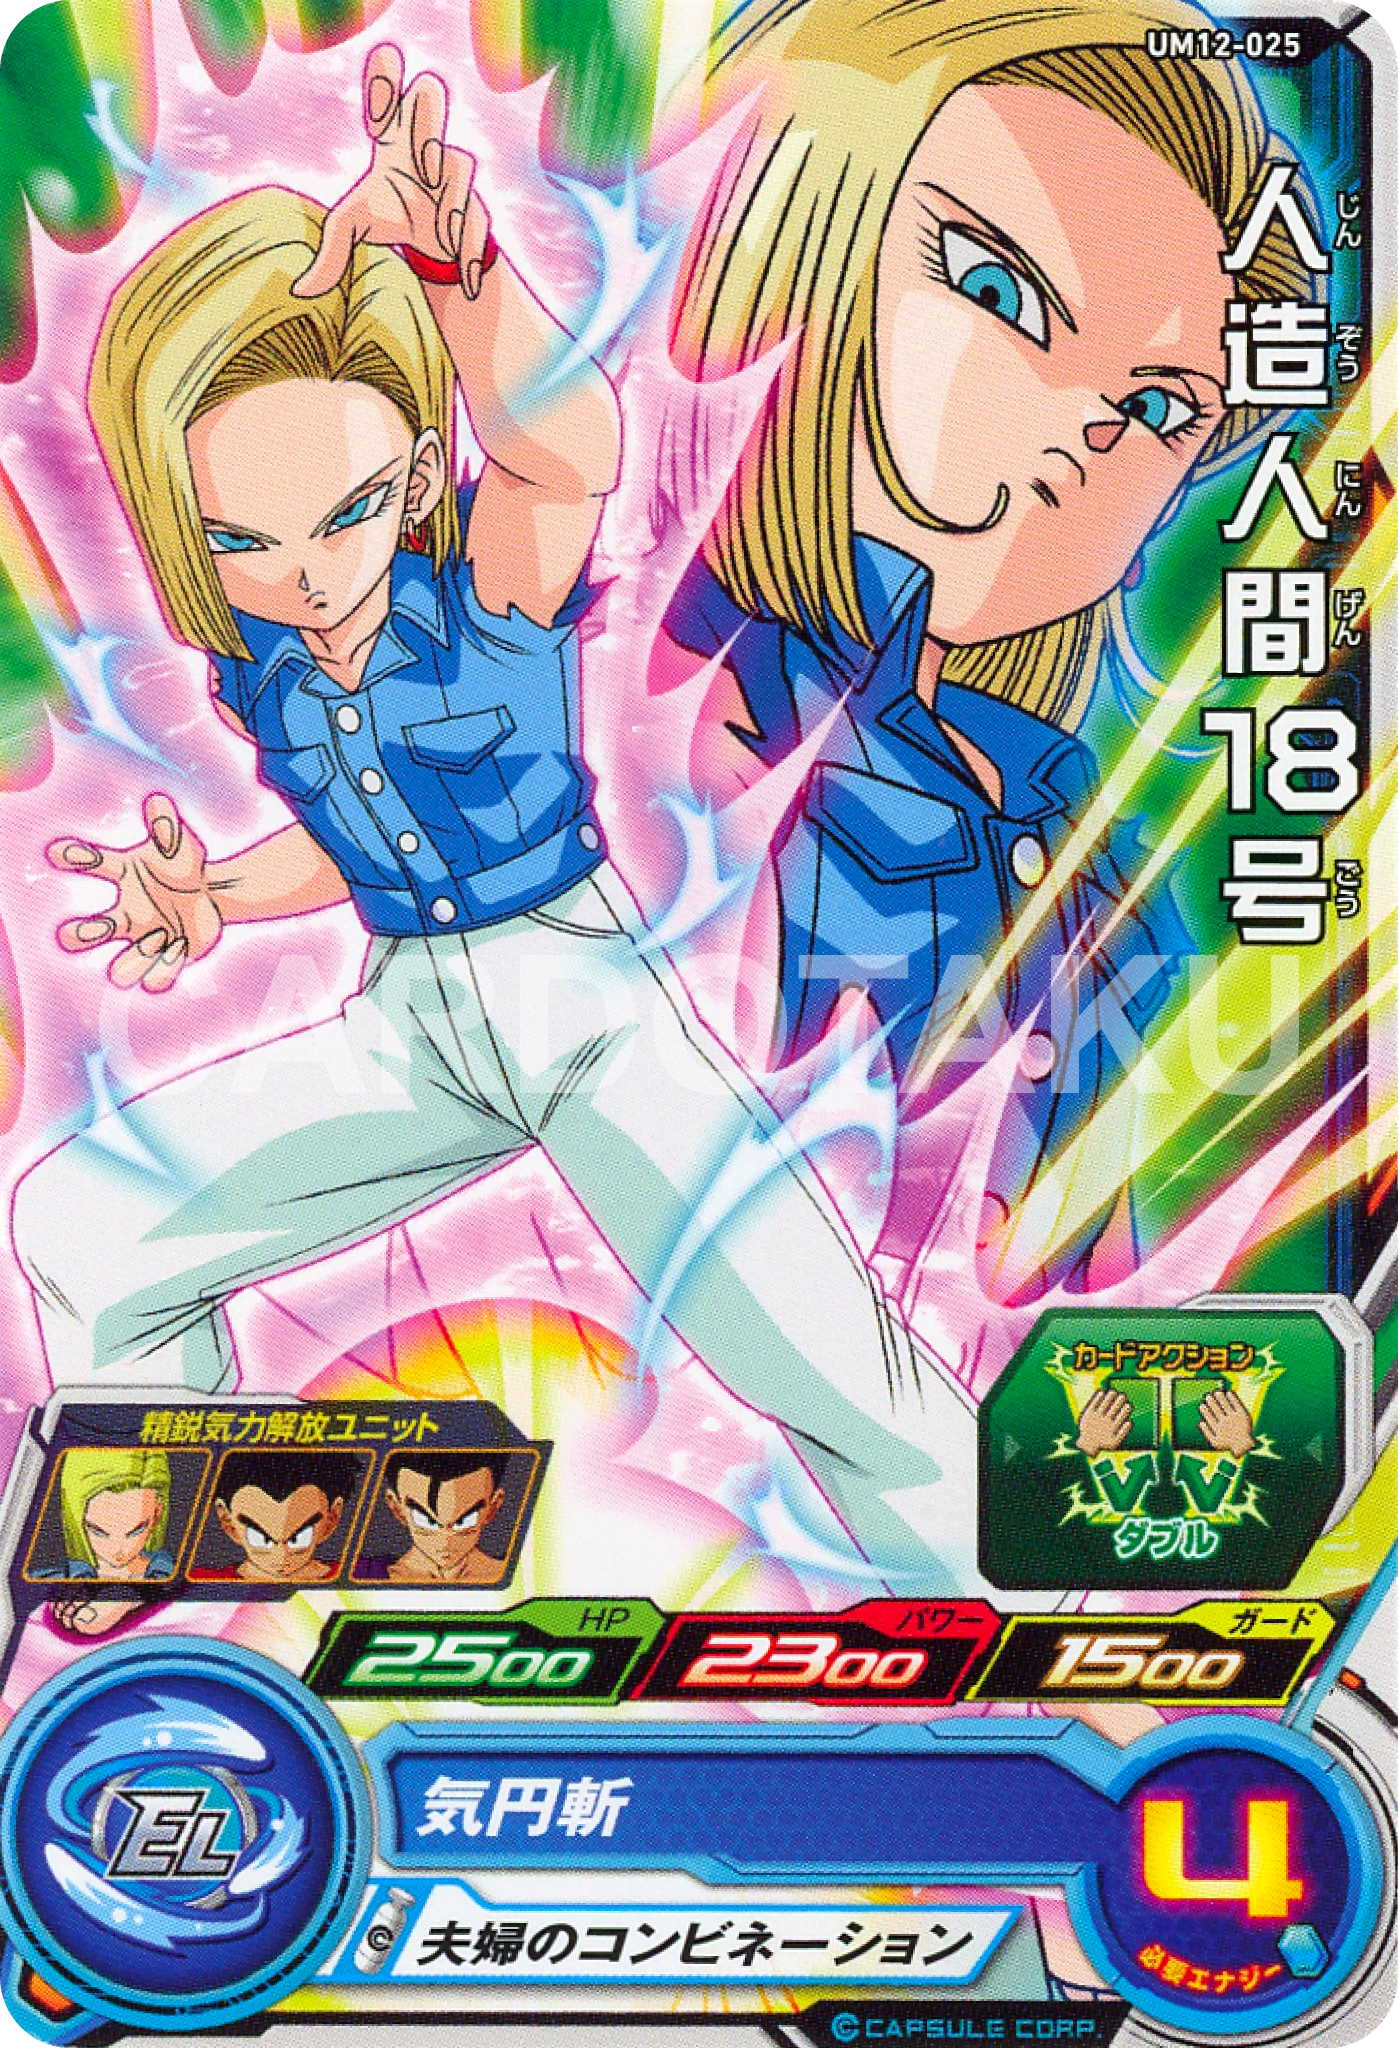 SUPER DRAGON BALL HEROES UM12-025 Common card Android 18, C18